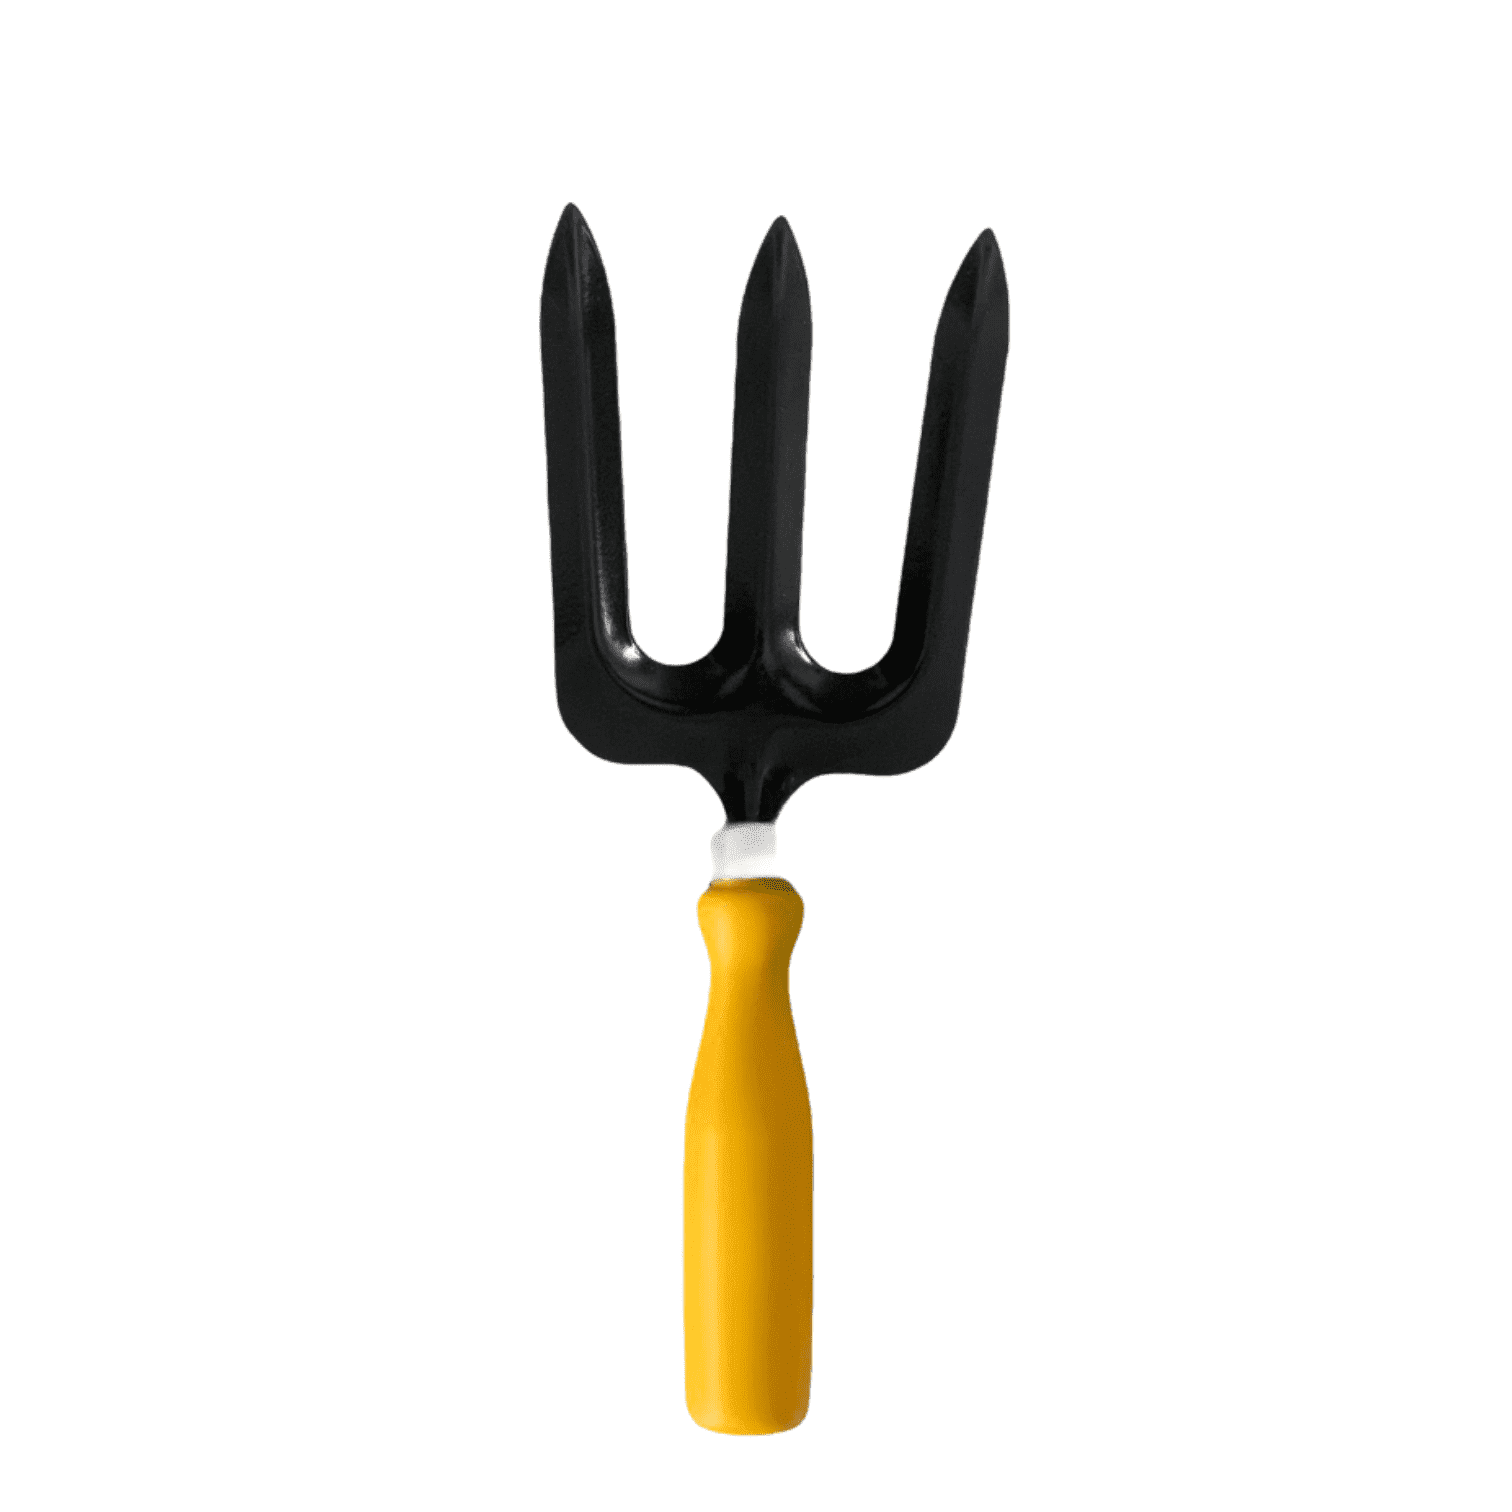 Fork with Plastic Handle - Essential Gardening Tool